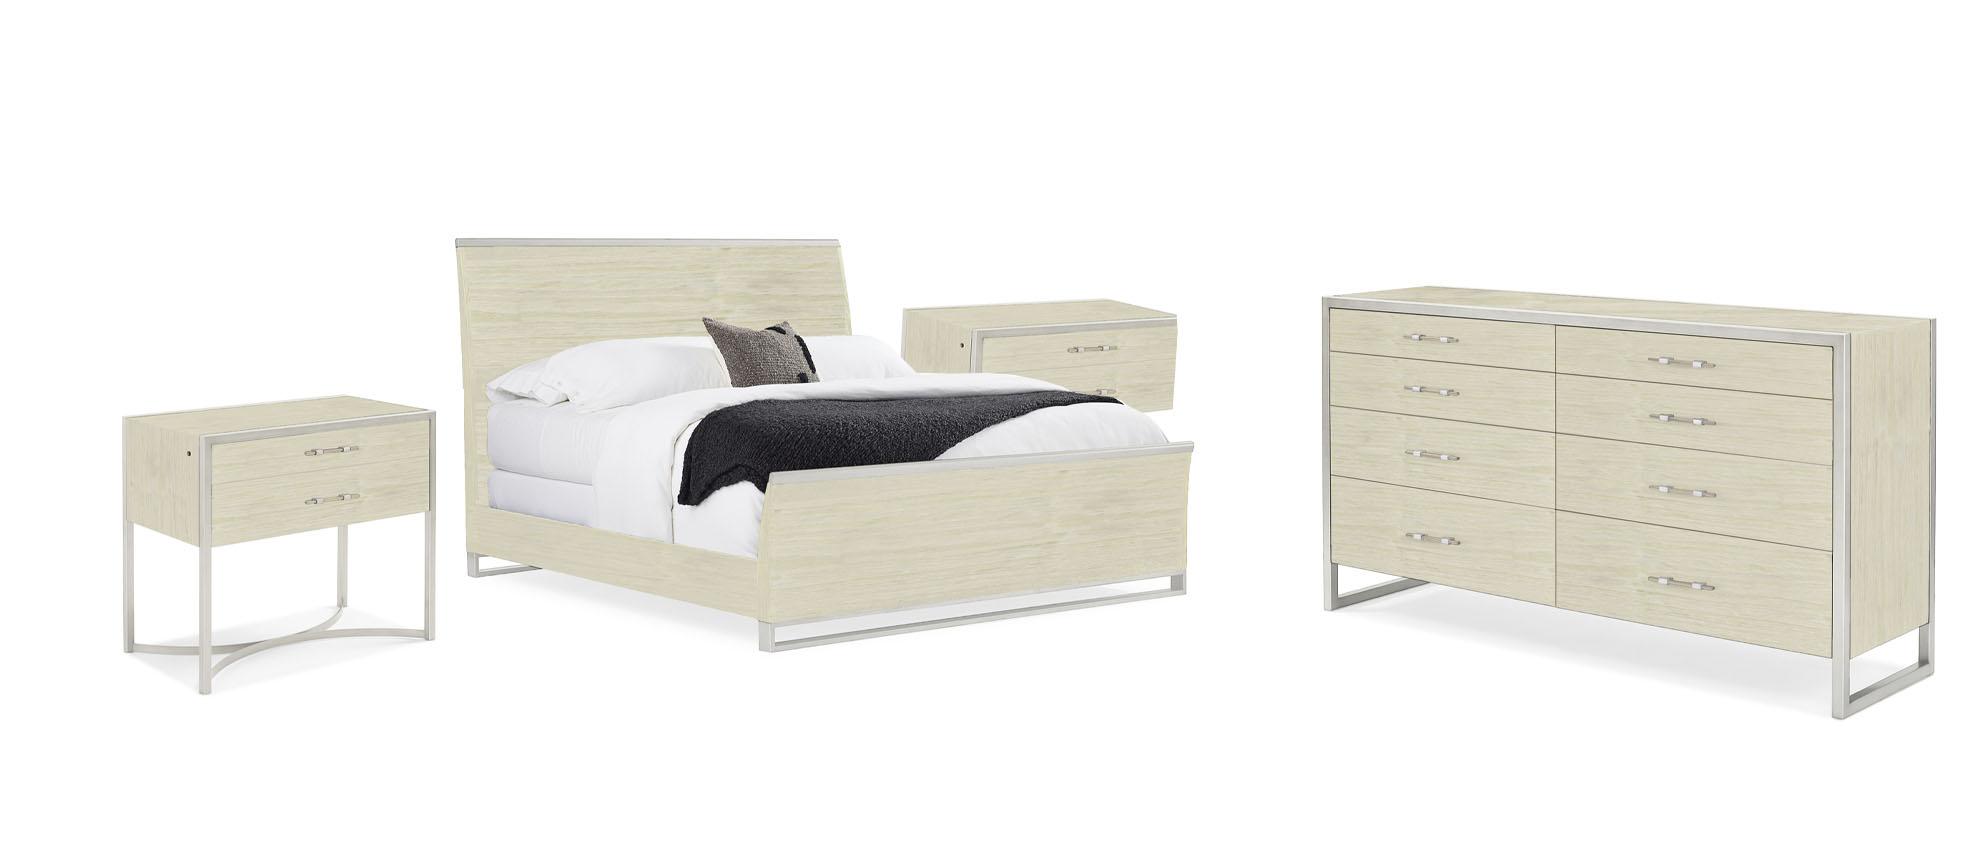 Contemporary Sleigh Bedroom Set REMIX WOOD BED / REMIX LARGE NIGHTSTAND M113-019-124-Set-4 in Pearl 